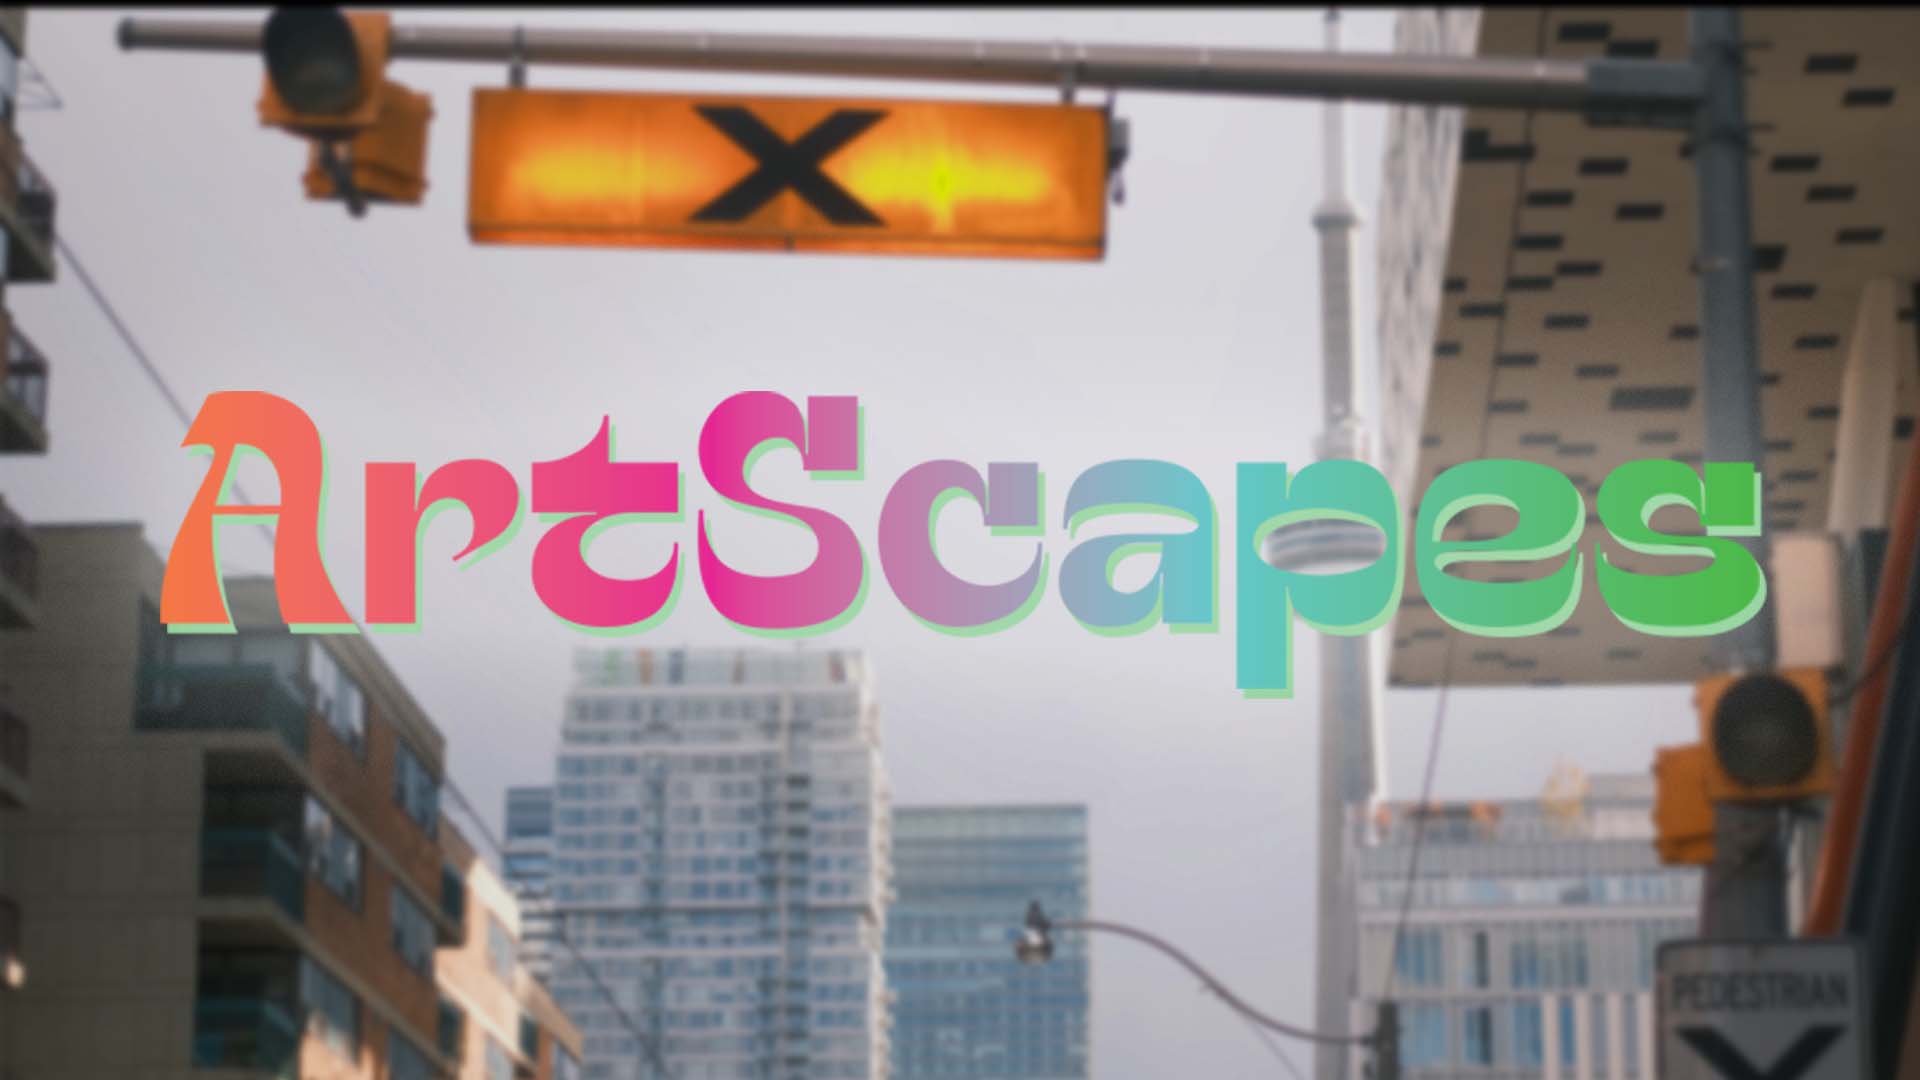 Artscapes logo type against the backdrop of a Toronto Skyline